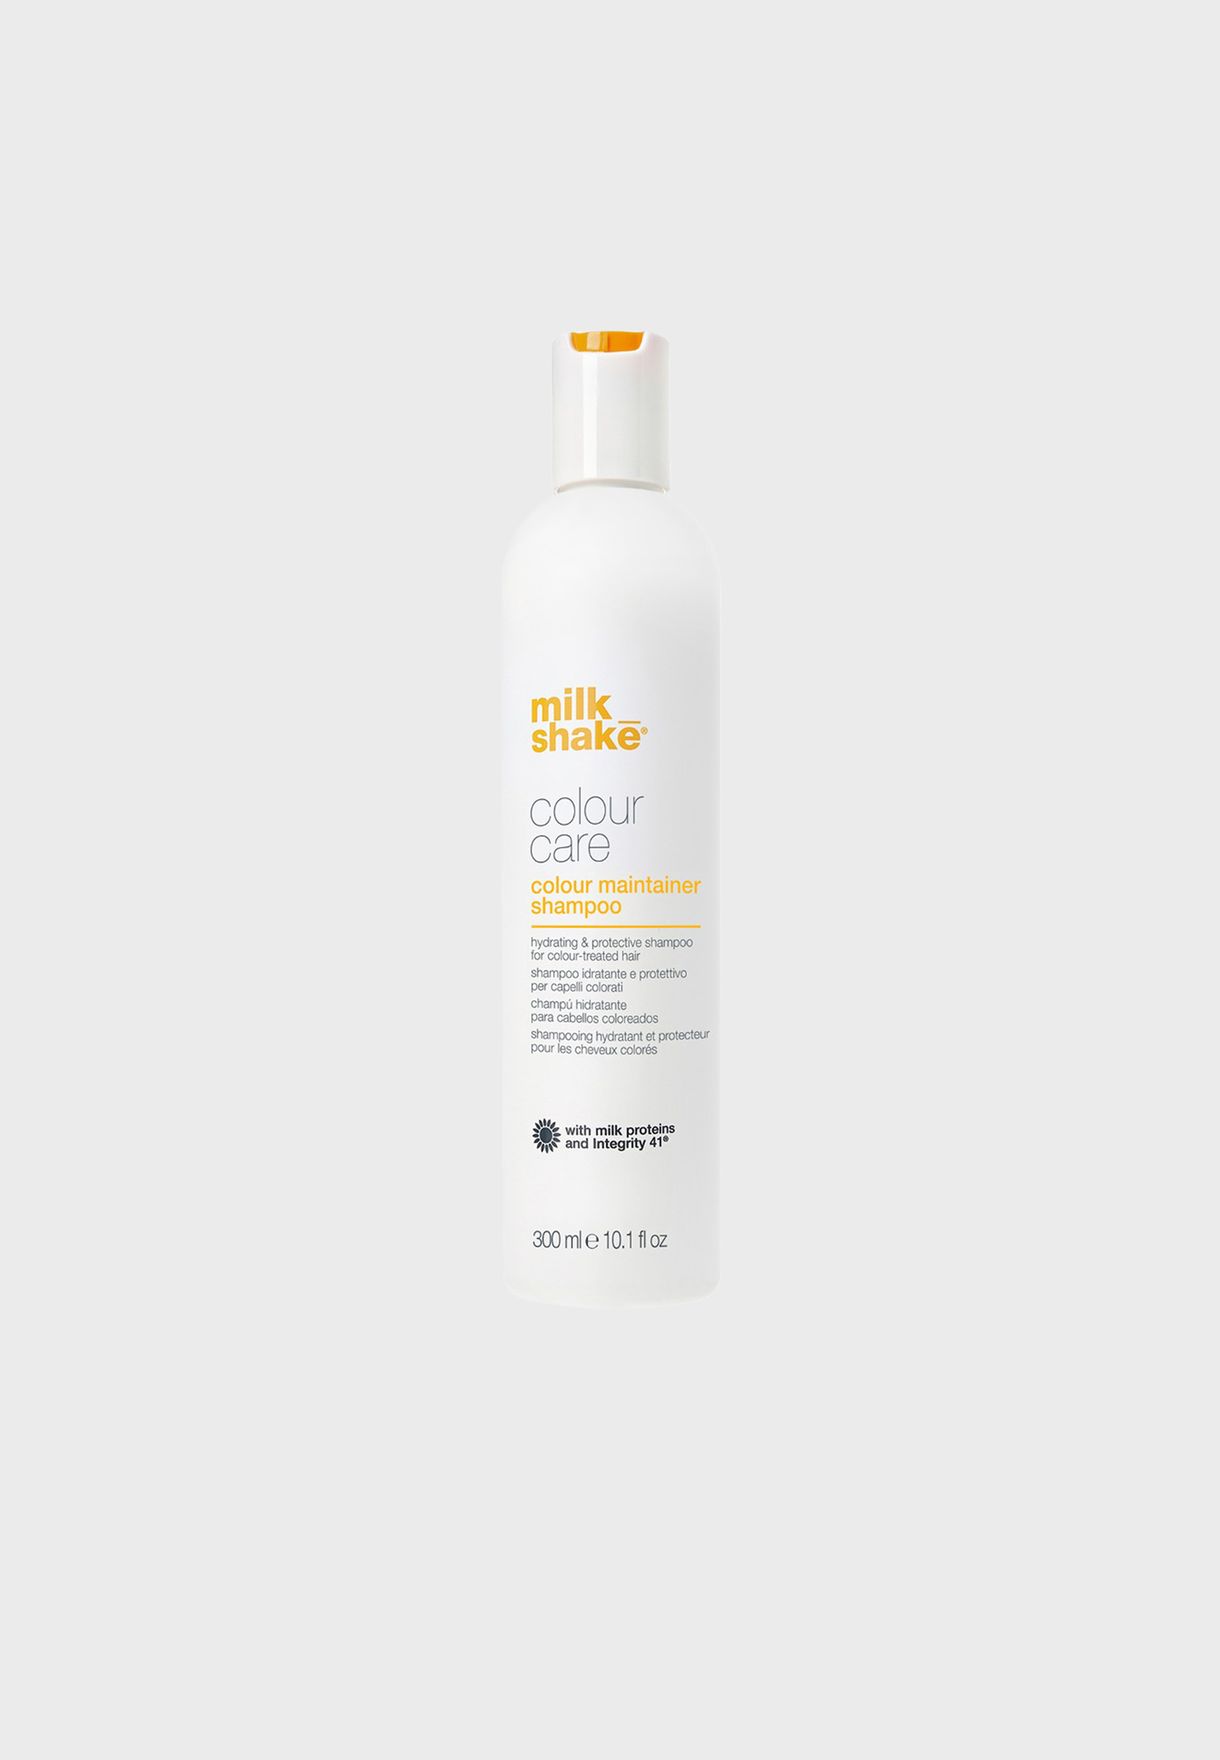 Color Maintainer Shampoo 300Ml